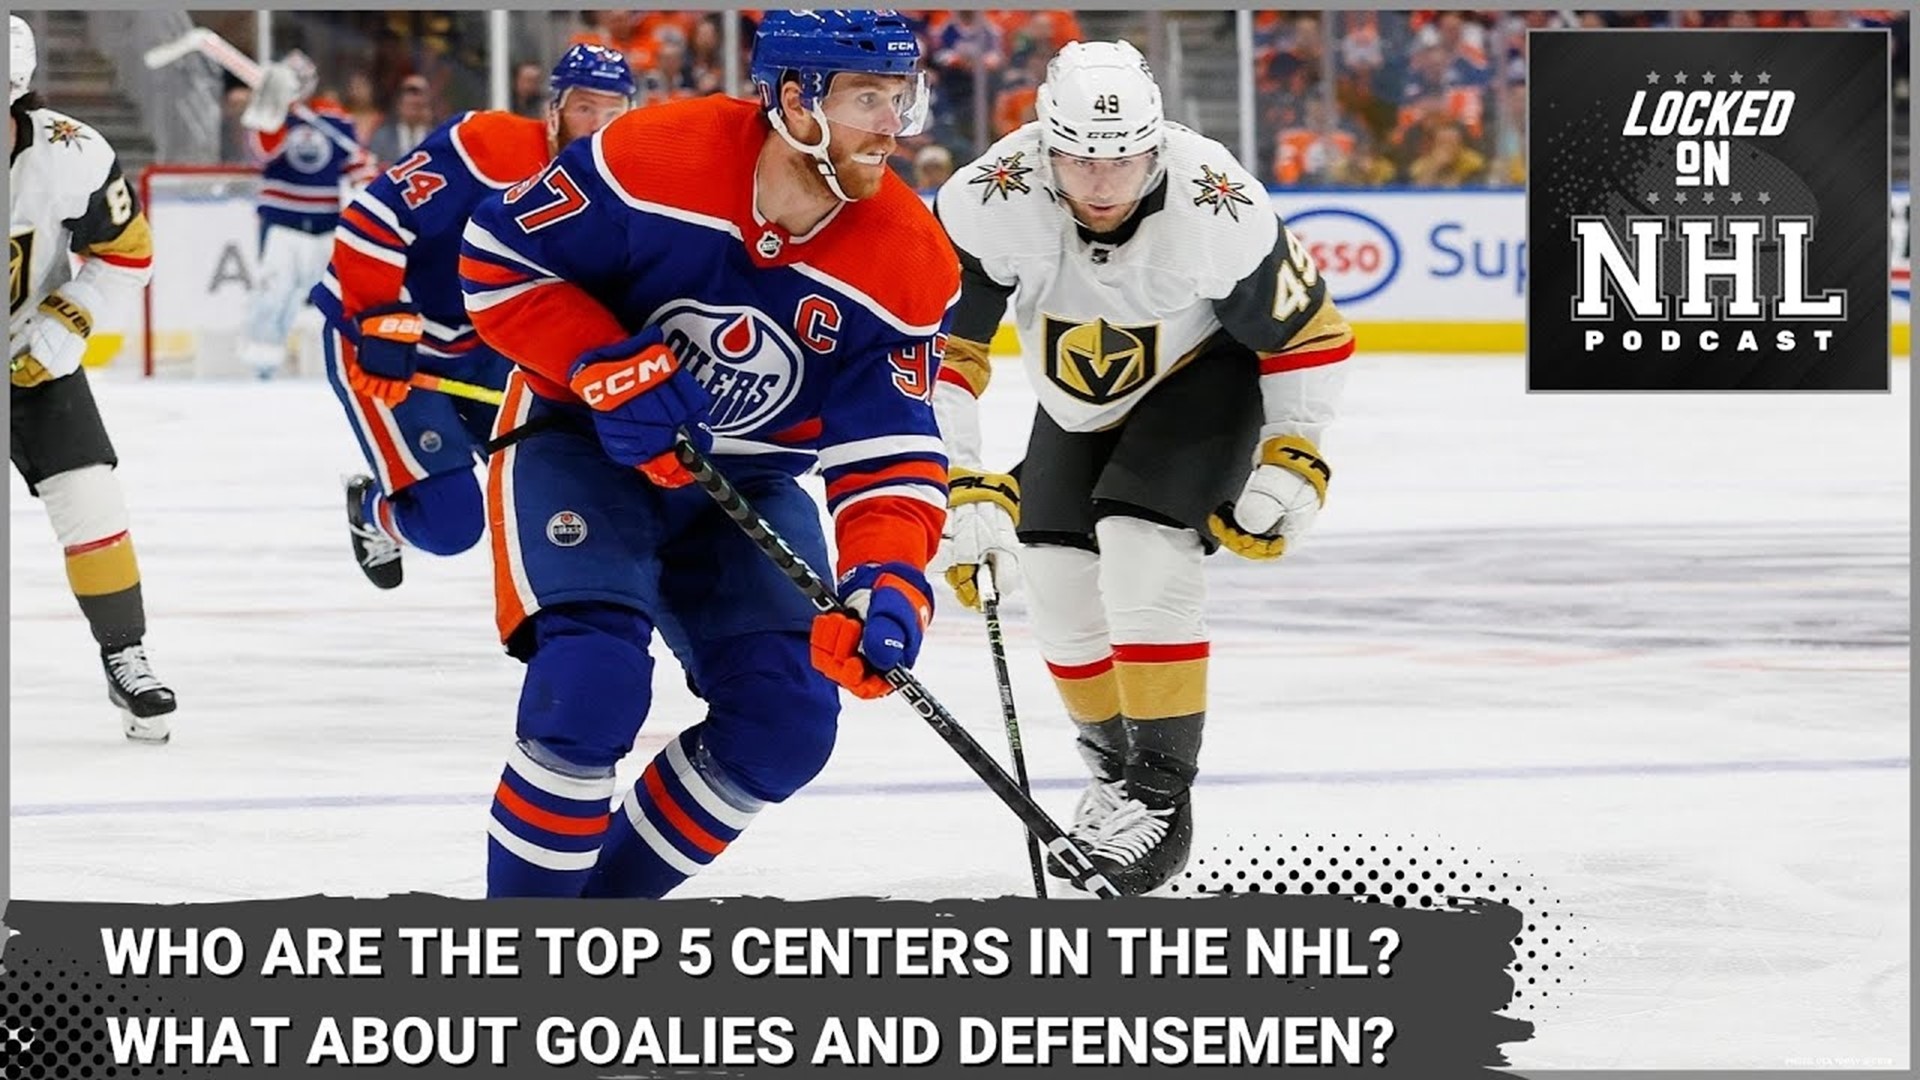 Ranking top centers in the NHL, where does Connor McDavid fall? 9news